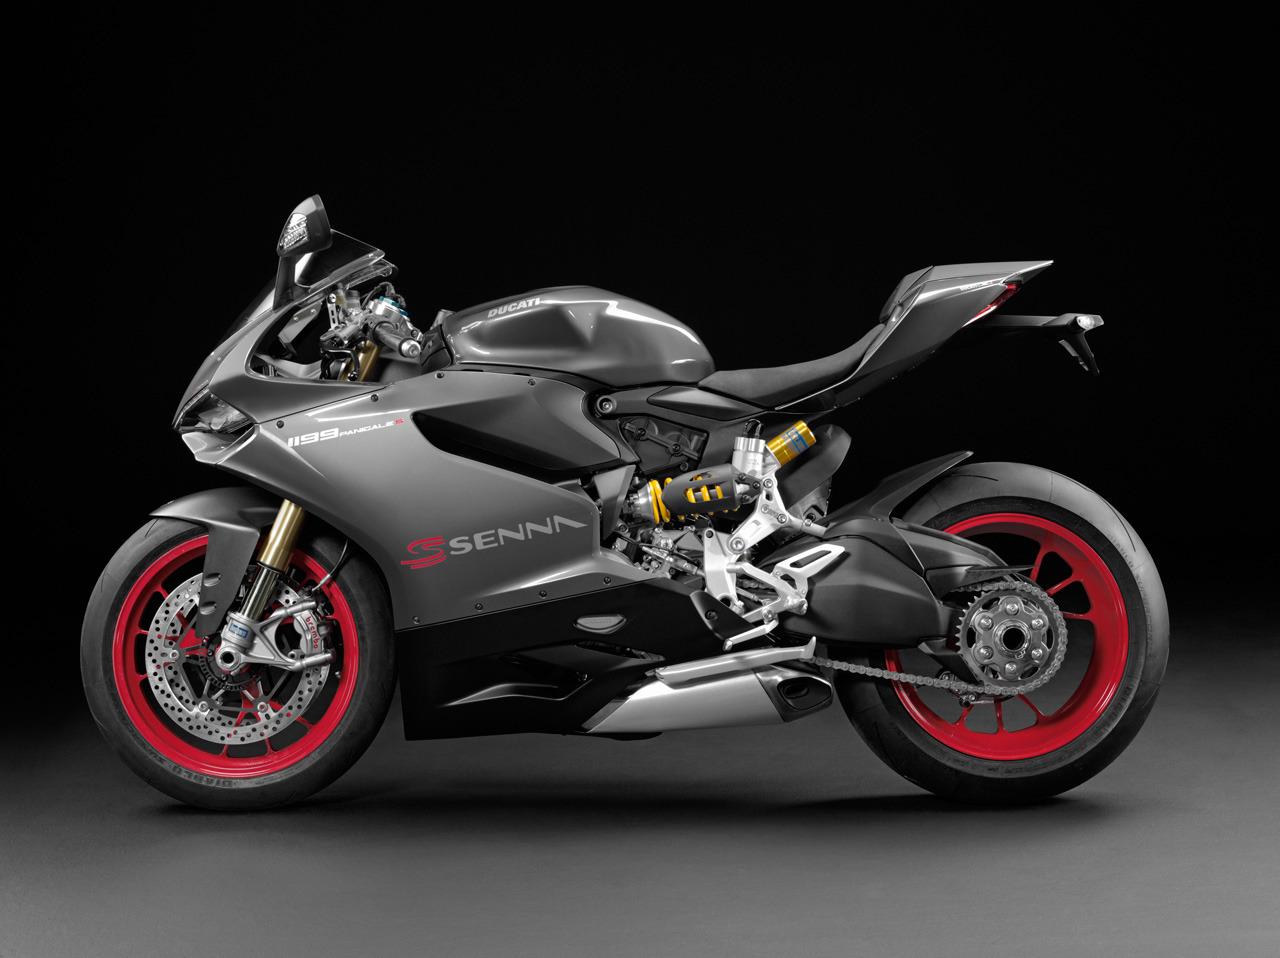 2016 Ducati 1199 Panigale First Looks